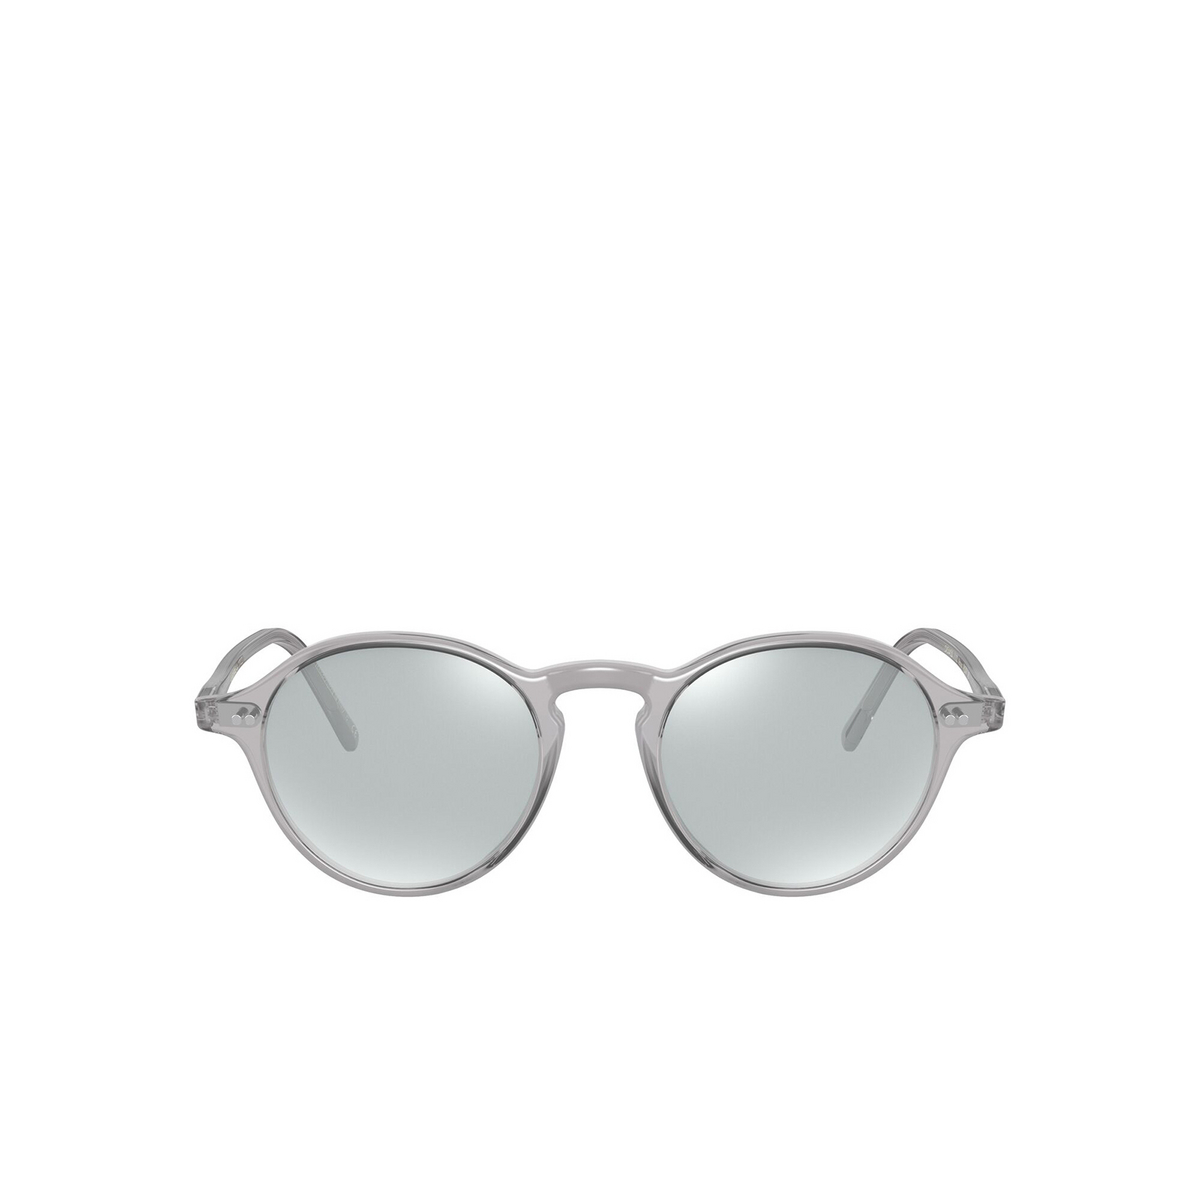 Oliver Peoples® Round Eyeglasses: Maxson OV5445U color Workman Grey 1132 - front view.